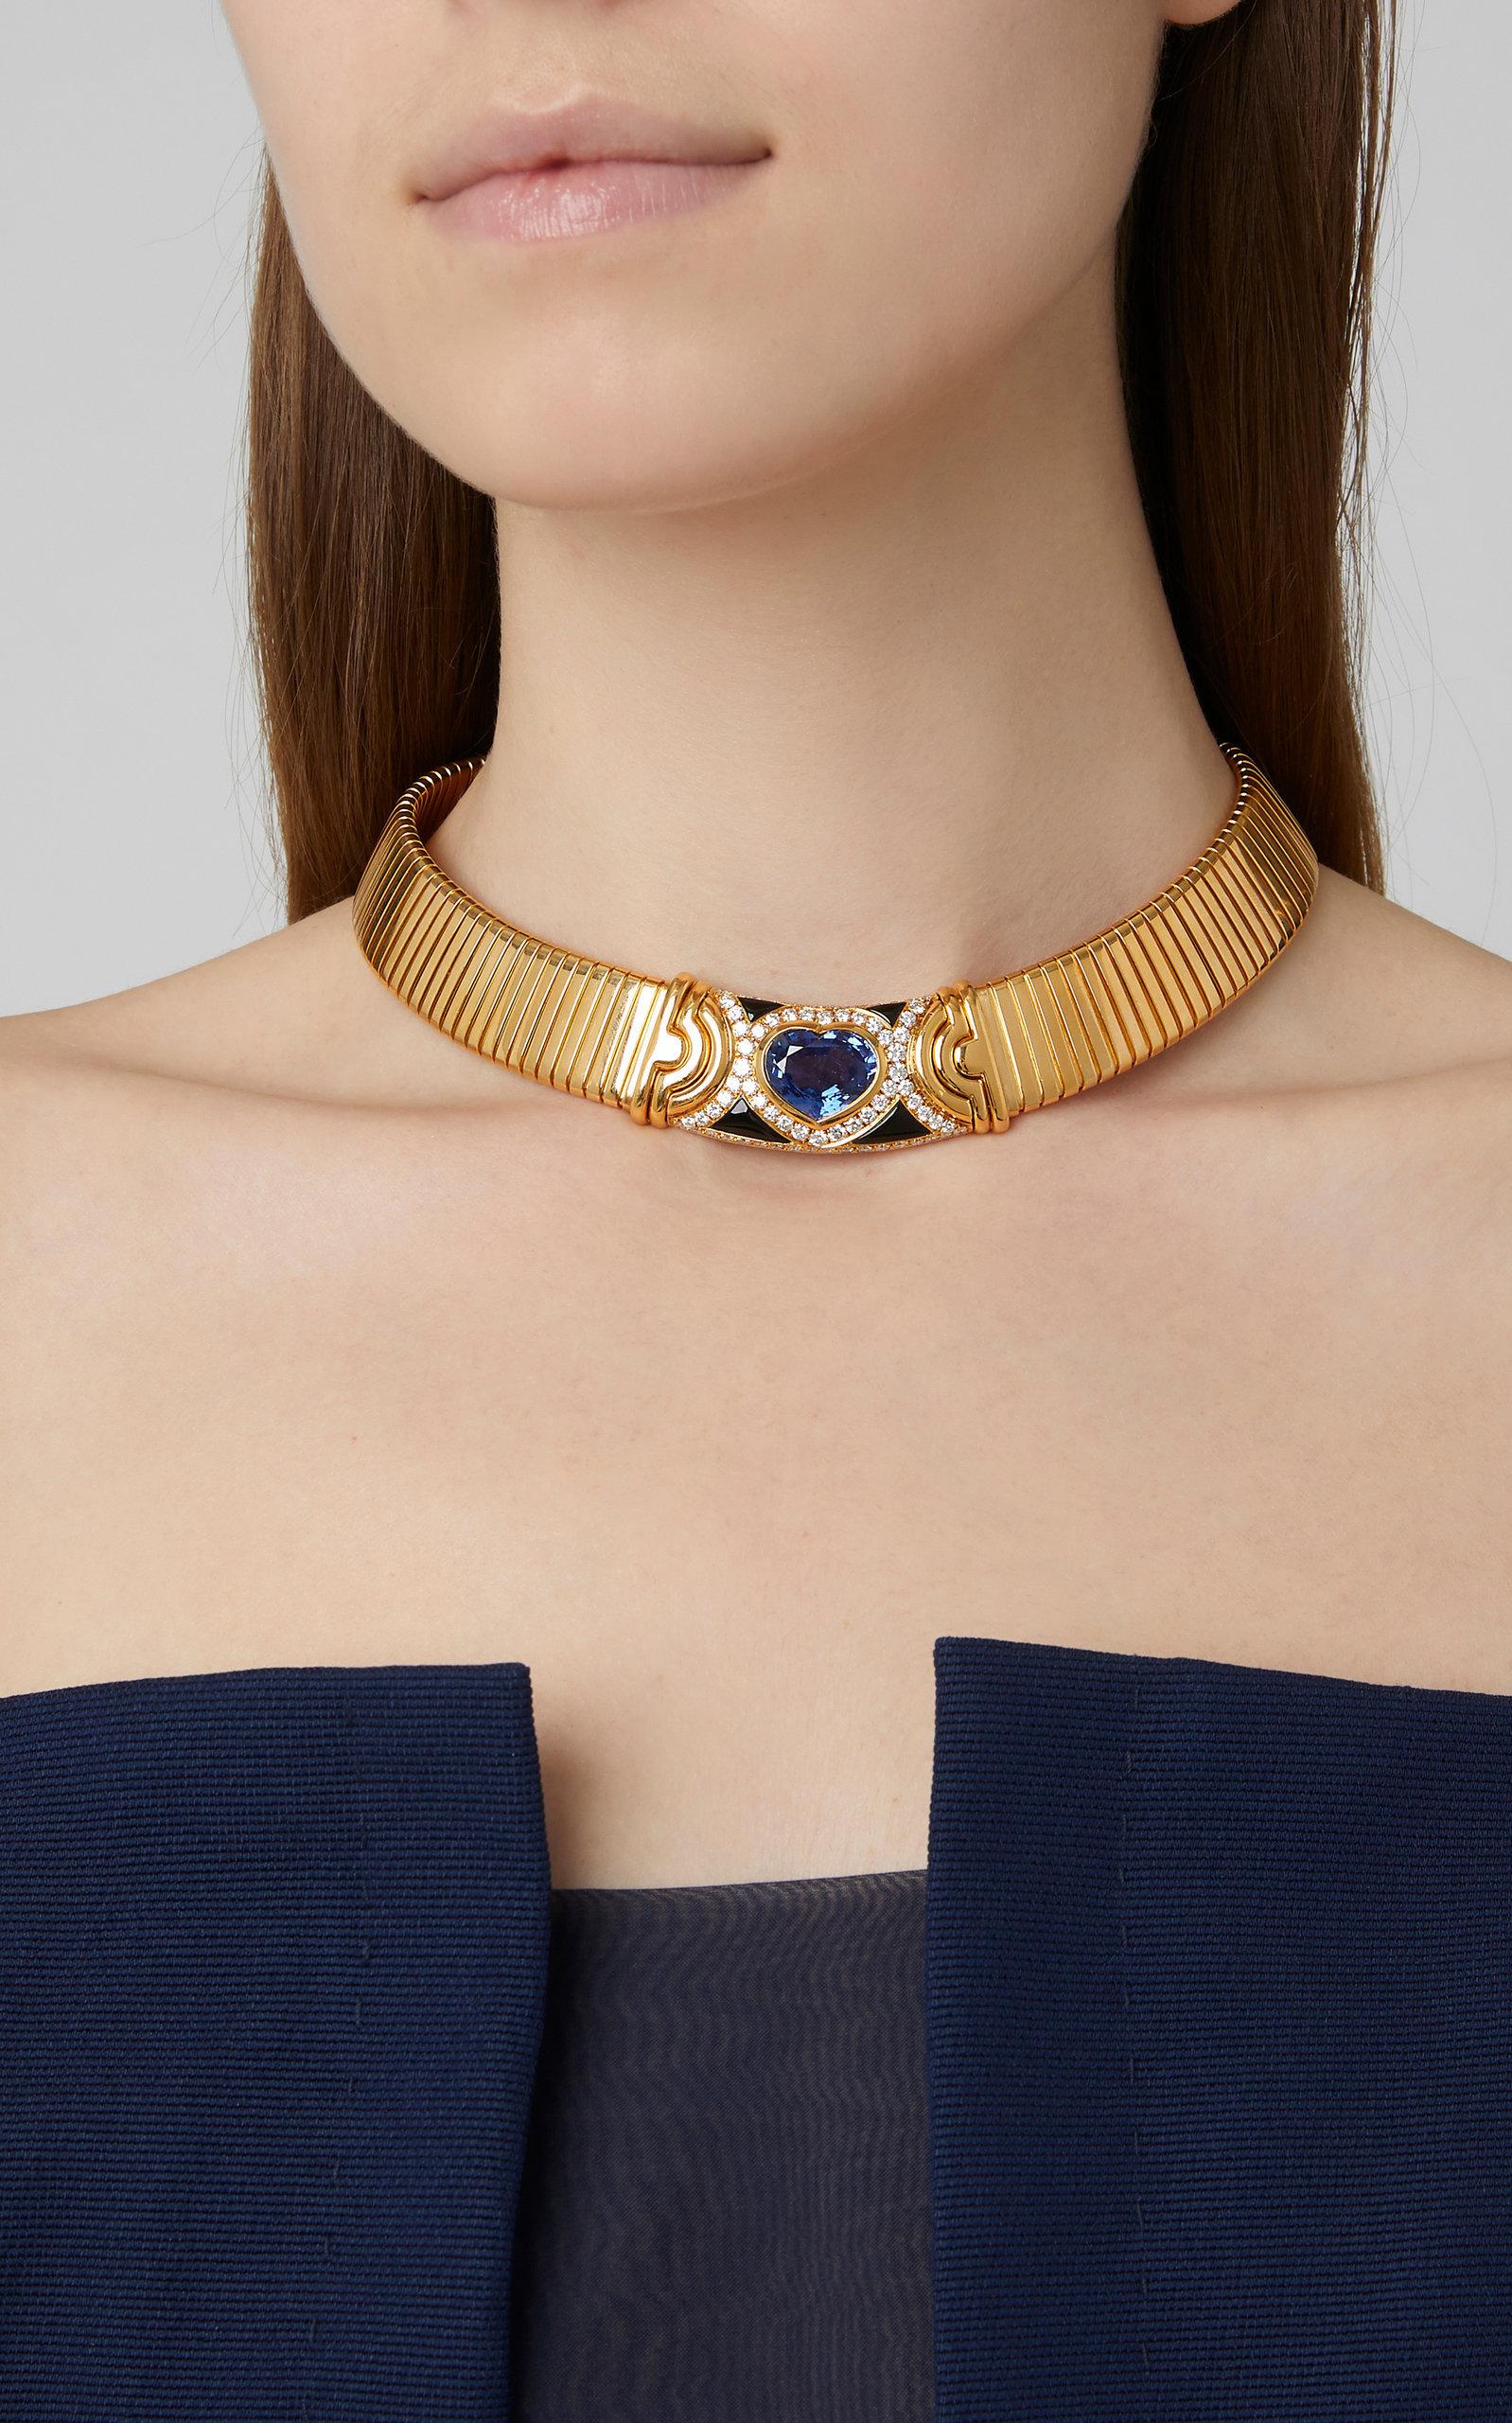 A beautiful Bulgari 18kt yellow gold choker necklace (adjustable size) centering a 14ct natural Ceylon heart-shaped sapphire, embellished by a diamond frame and onyx elements. Made in Italy, circa 1970.

